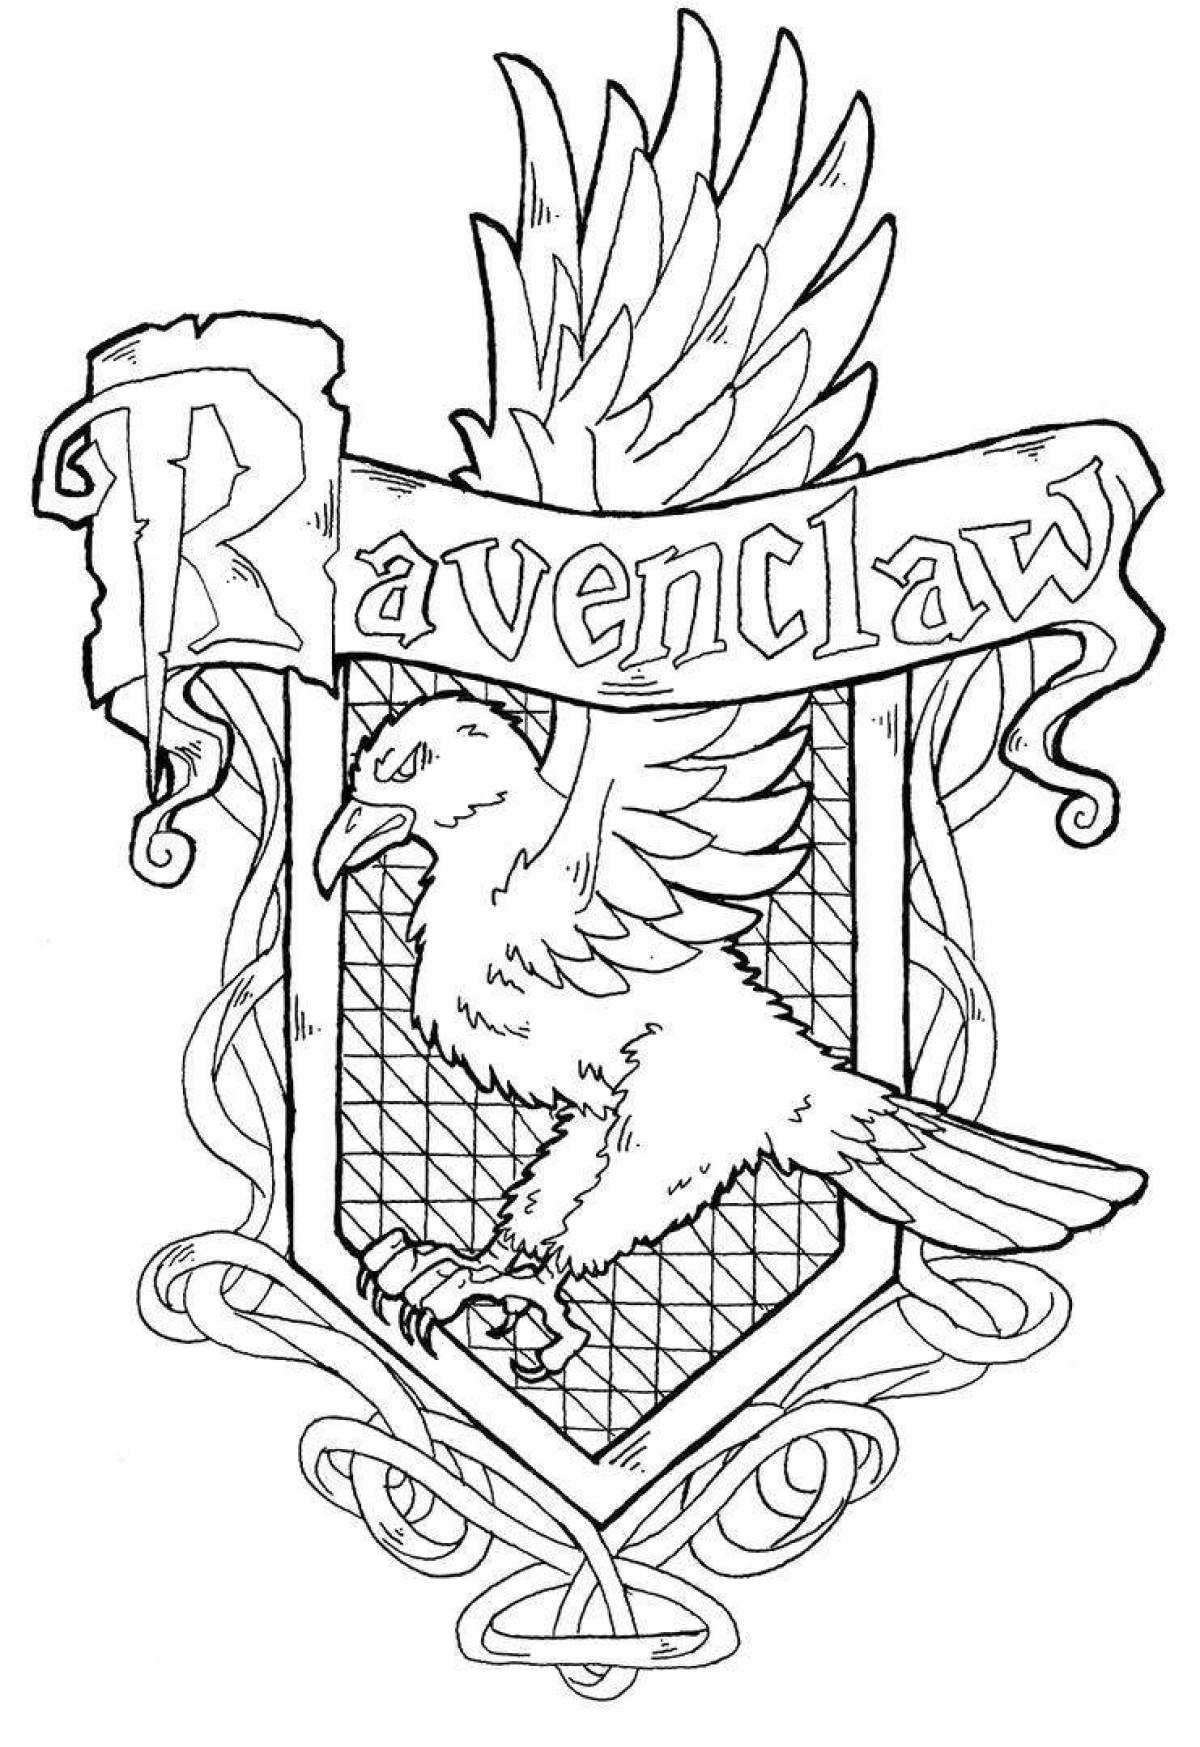 Coloring book brightly colored Hogwarts houses